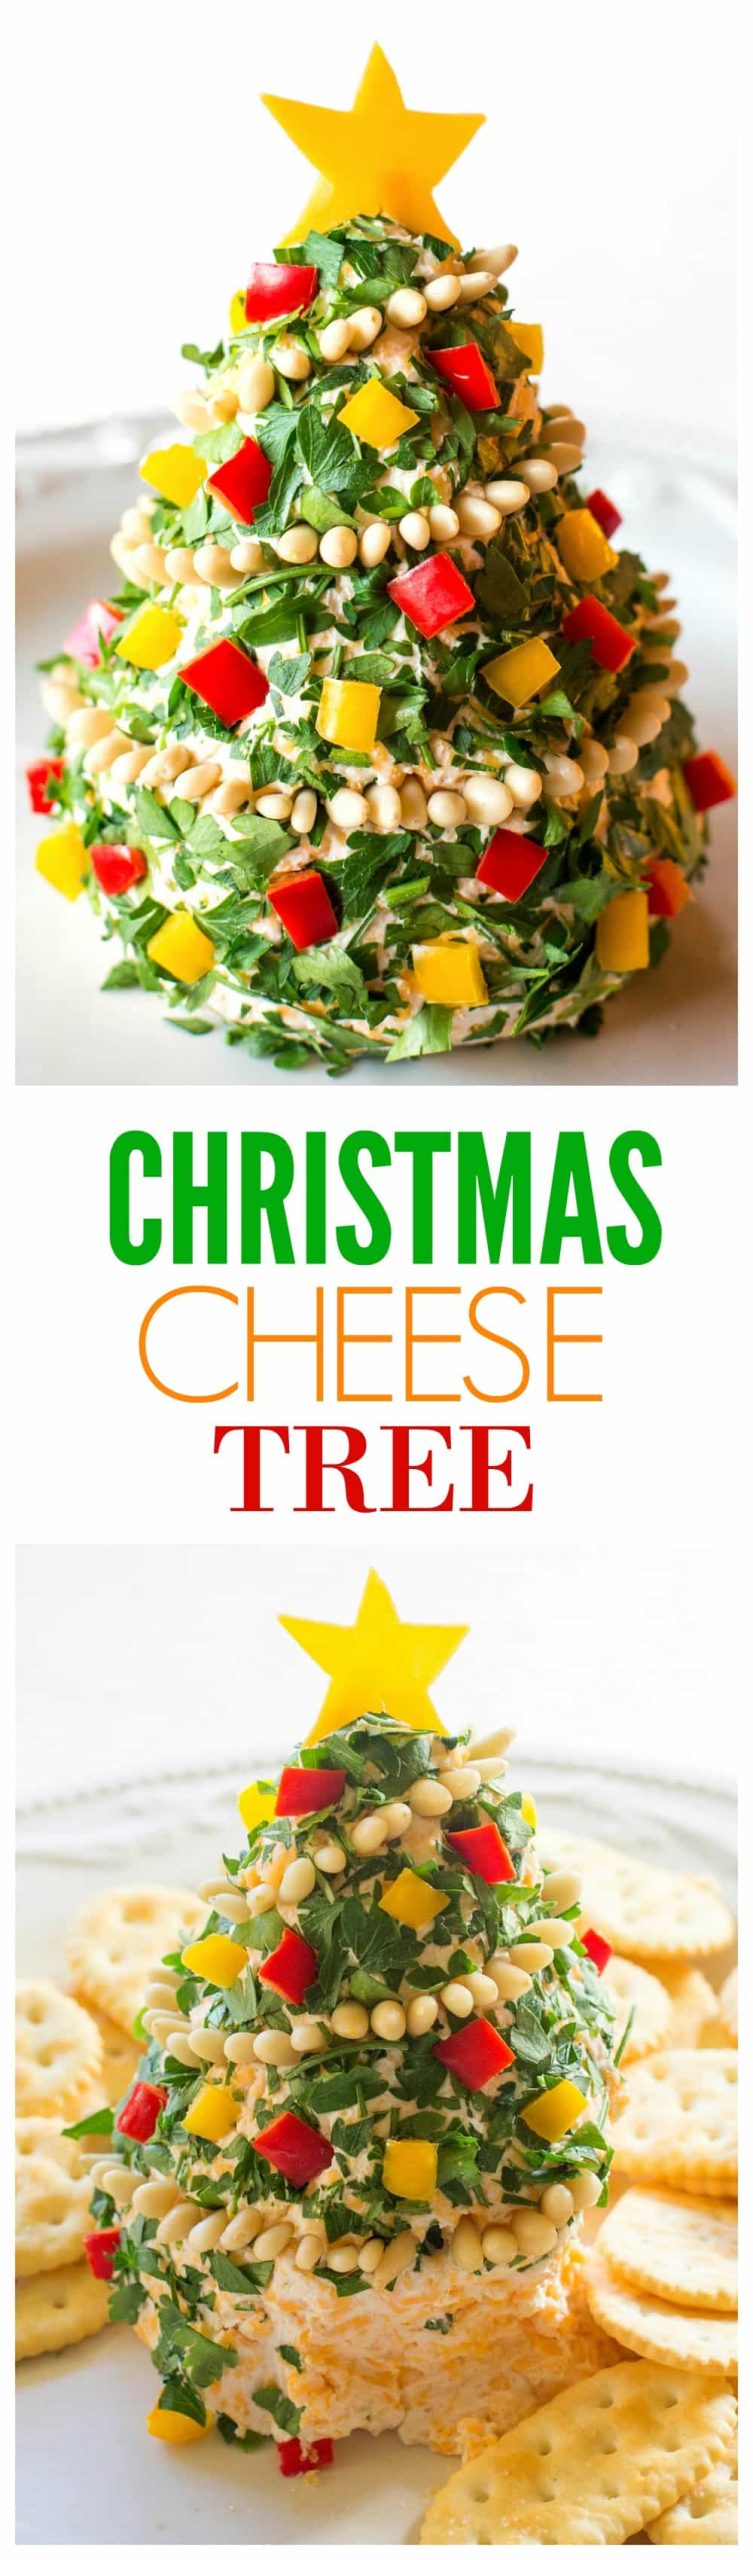 christmas cheese tree scaled - Christmas Cheese Tree